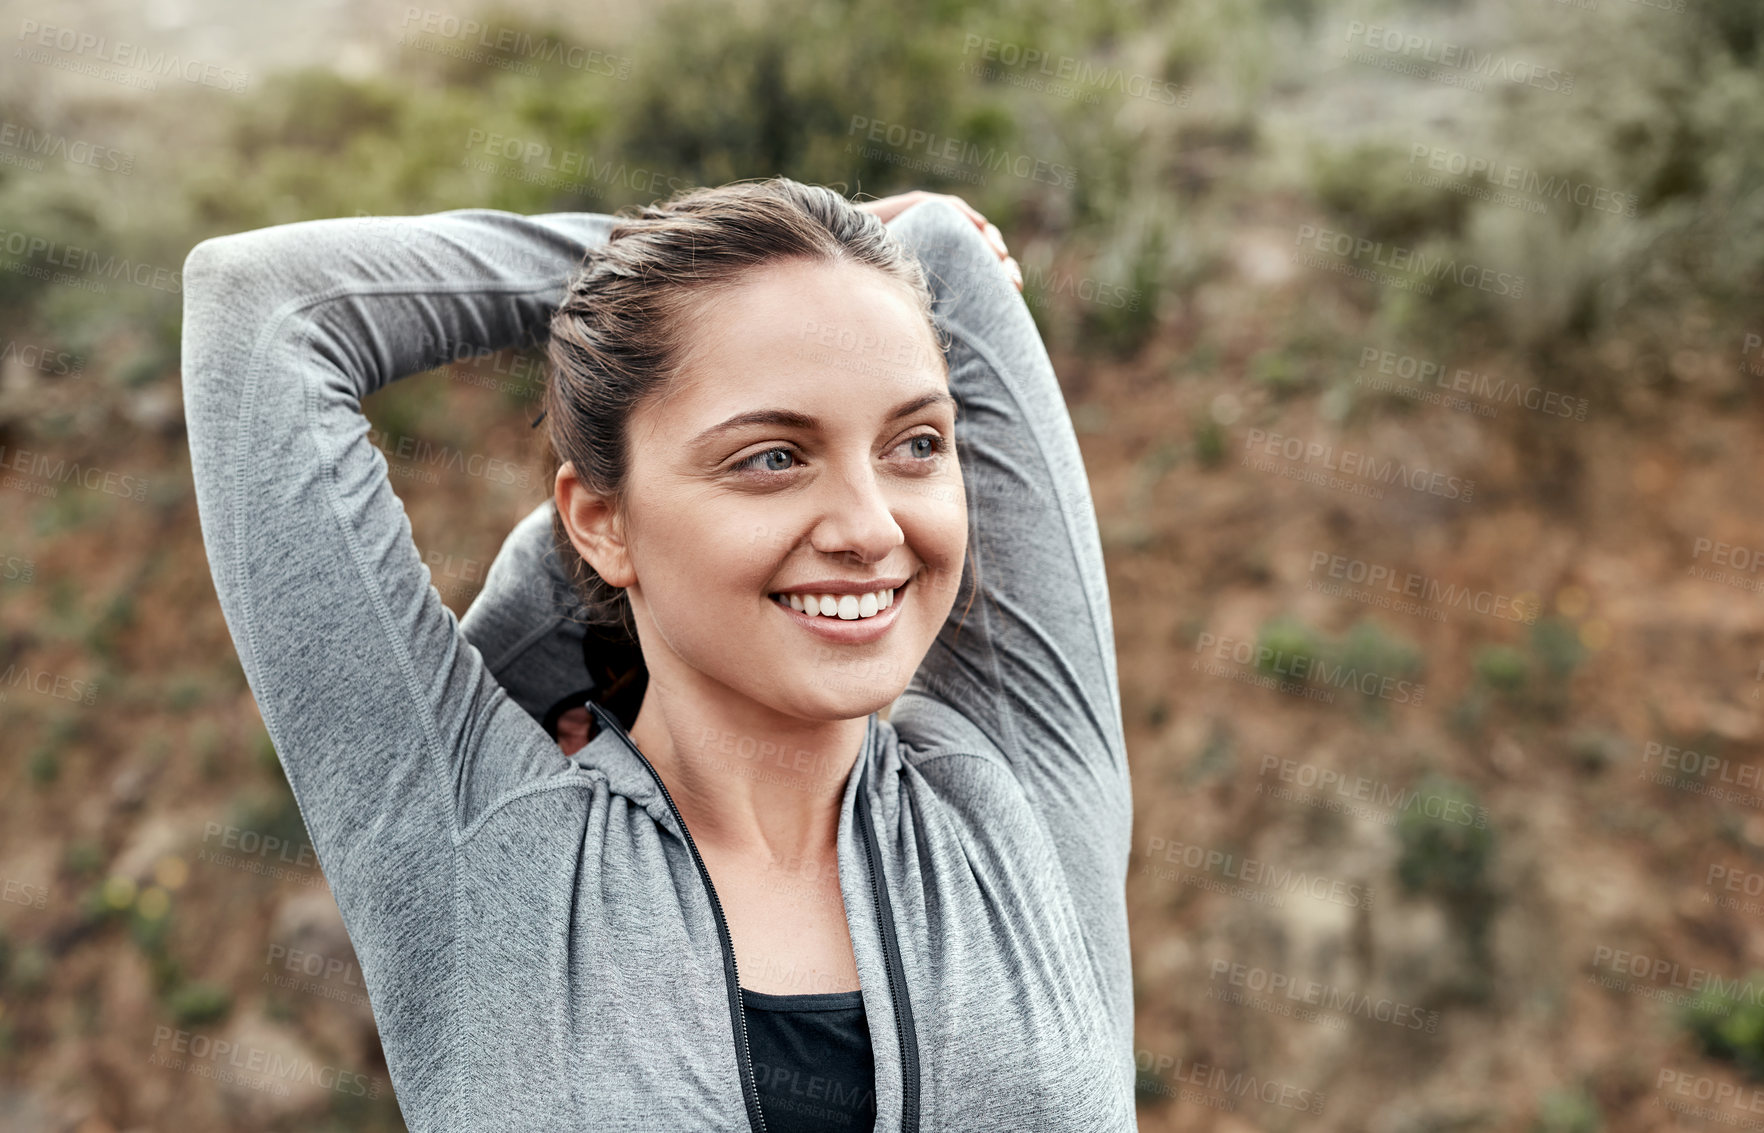 Buy stock photo Shot of a sporty young woman stretching her arms while exercising outdoors